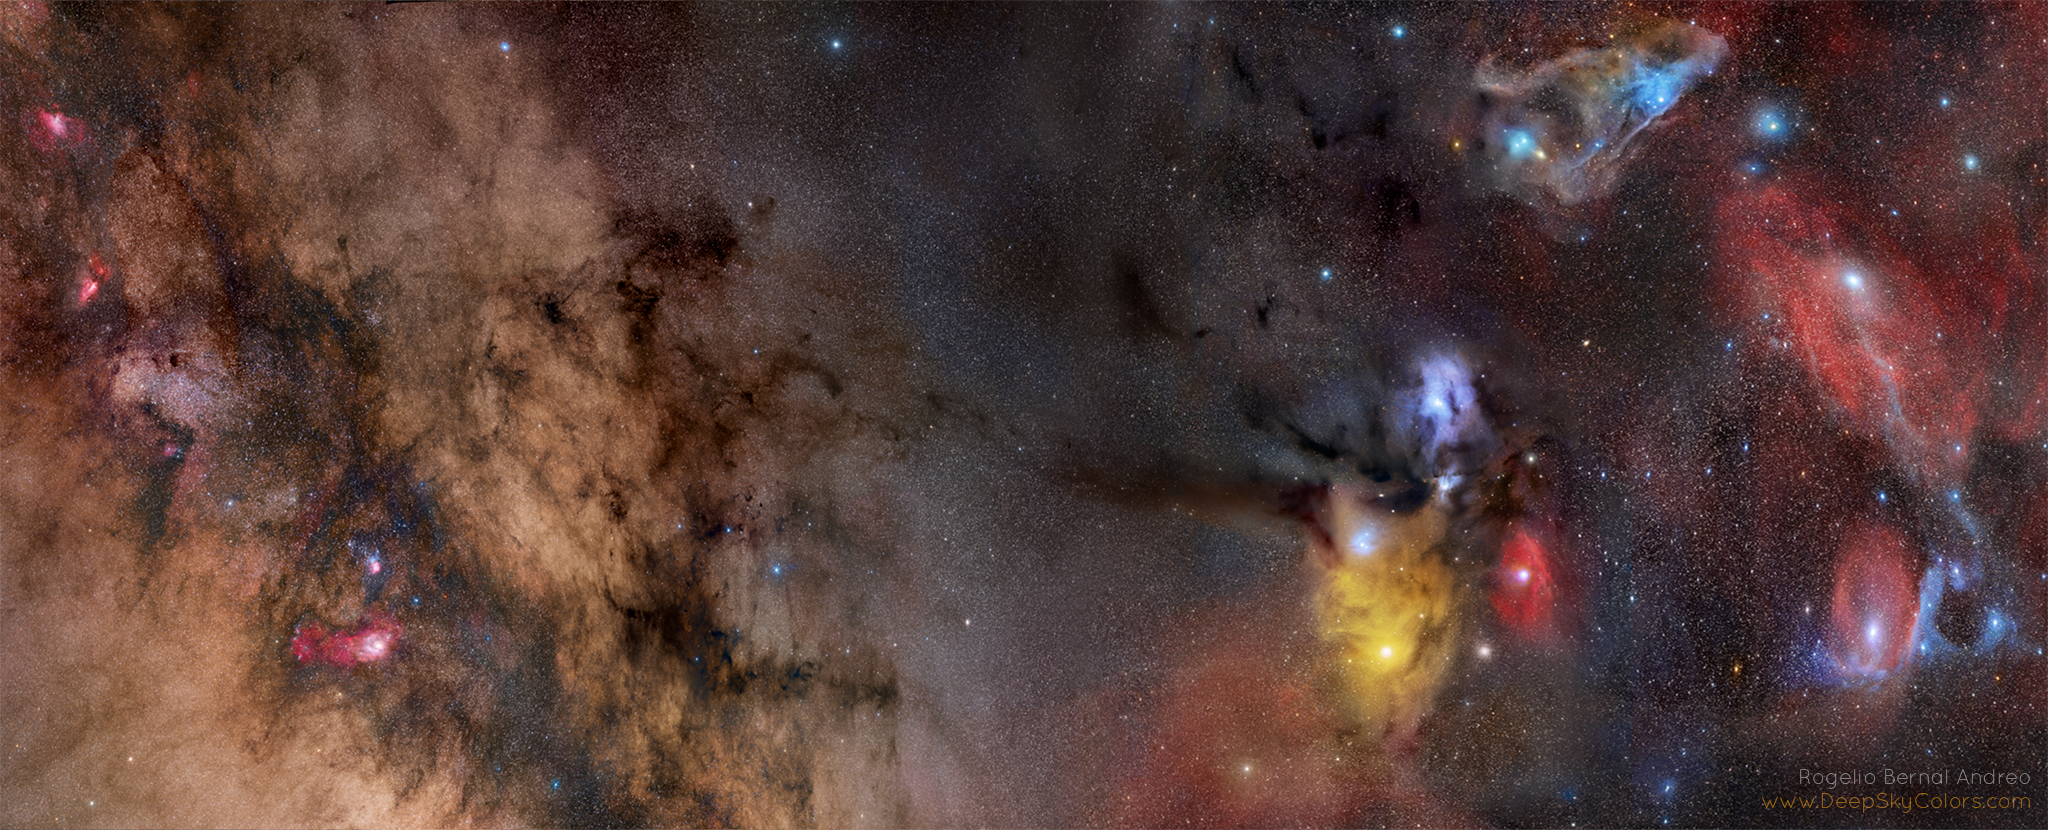 From the Galactic Plane through Antares